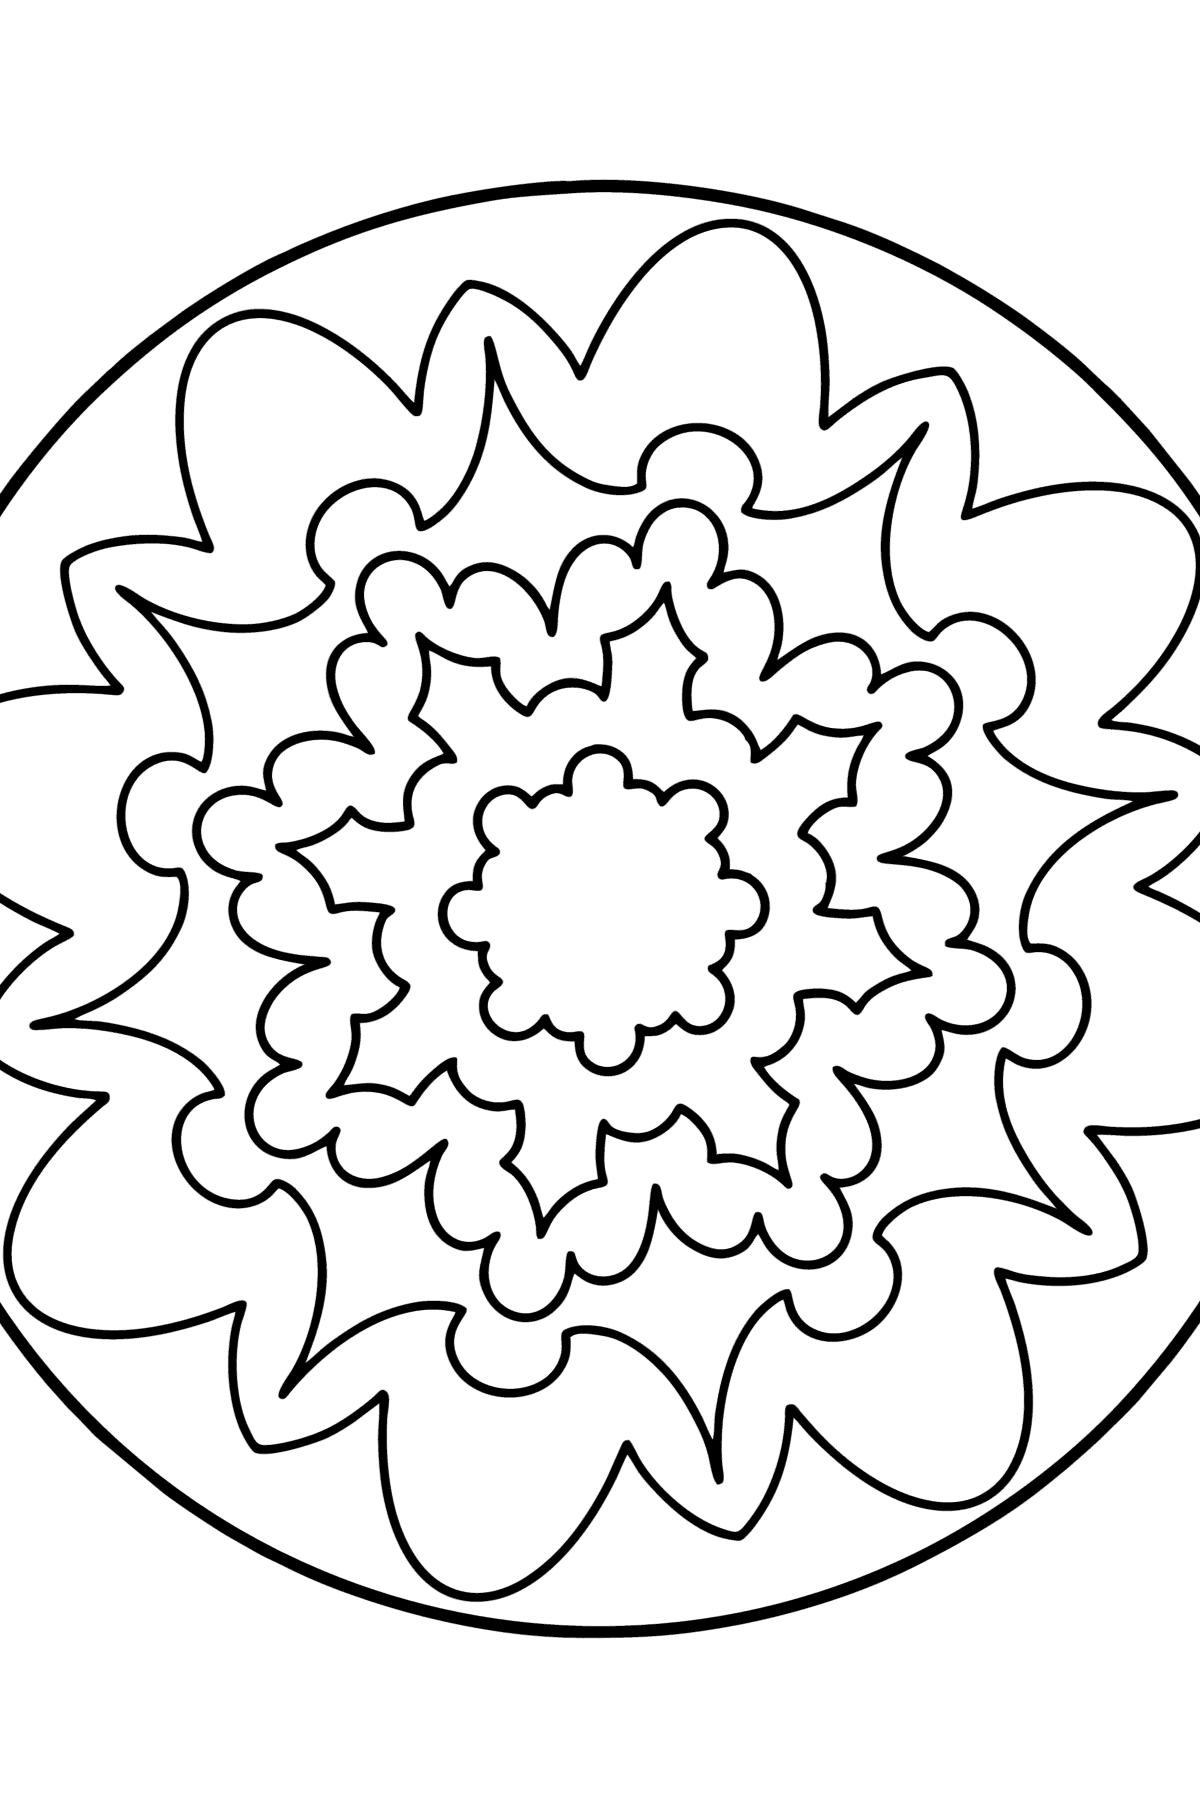 Mandala coloring page - 6 elements - Coloring Pages for Kids